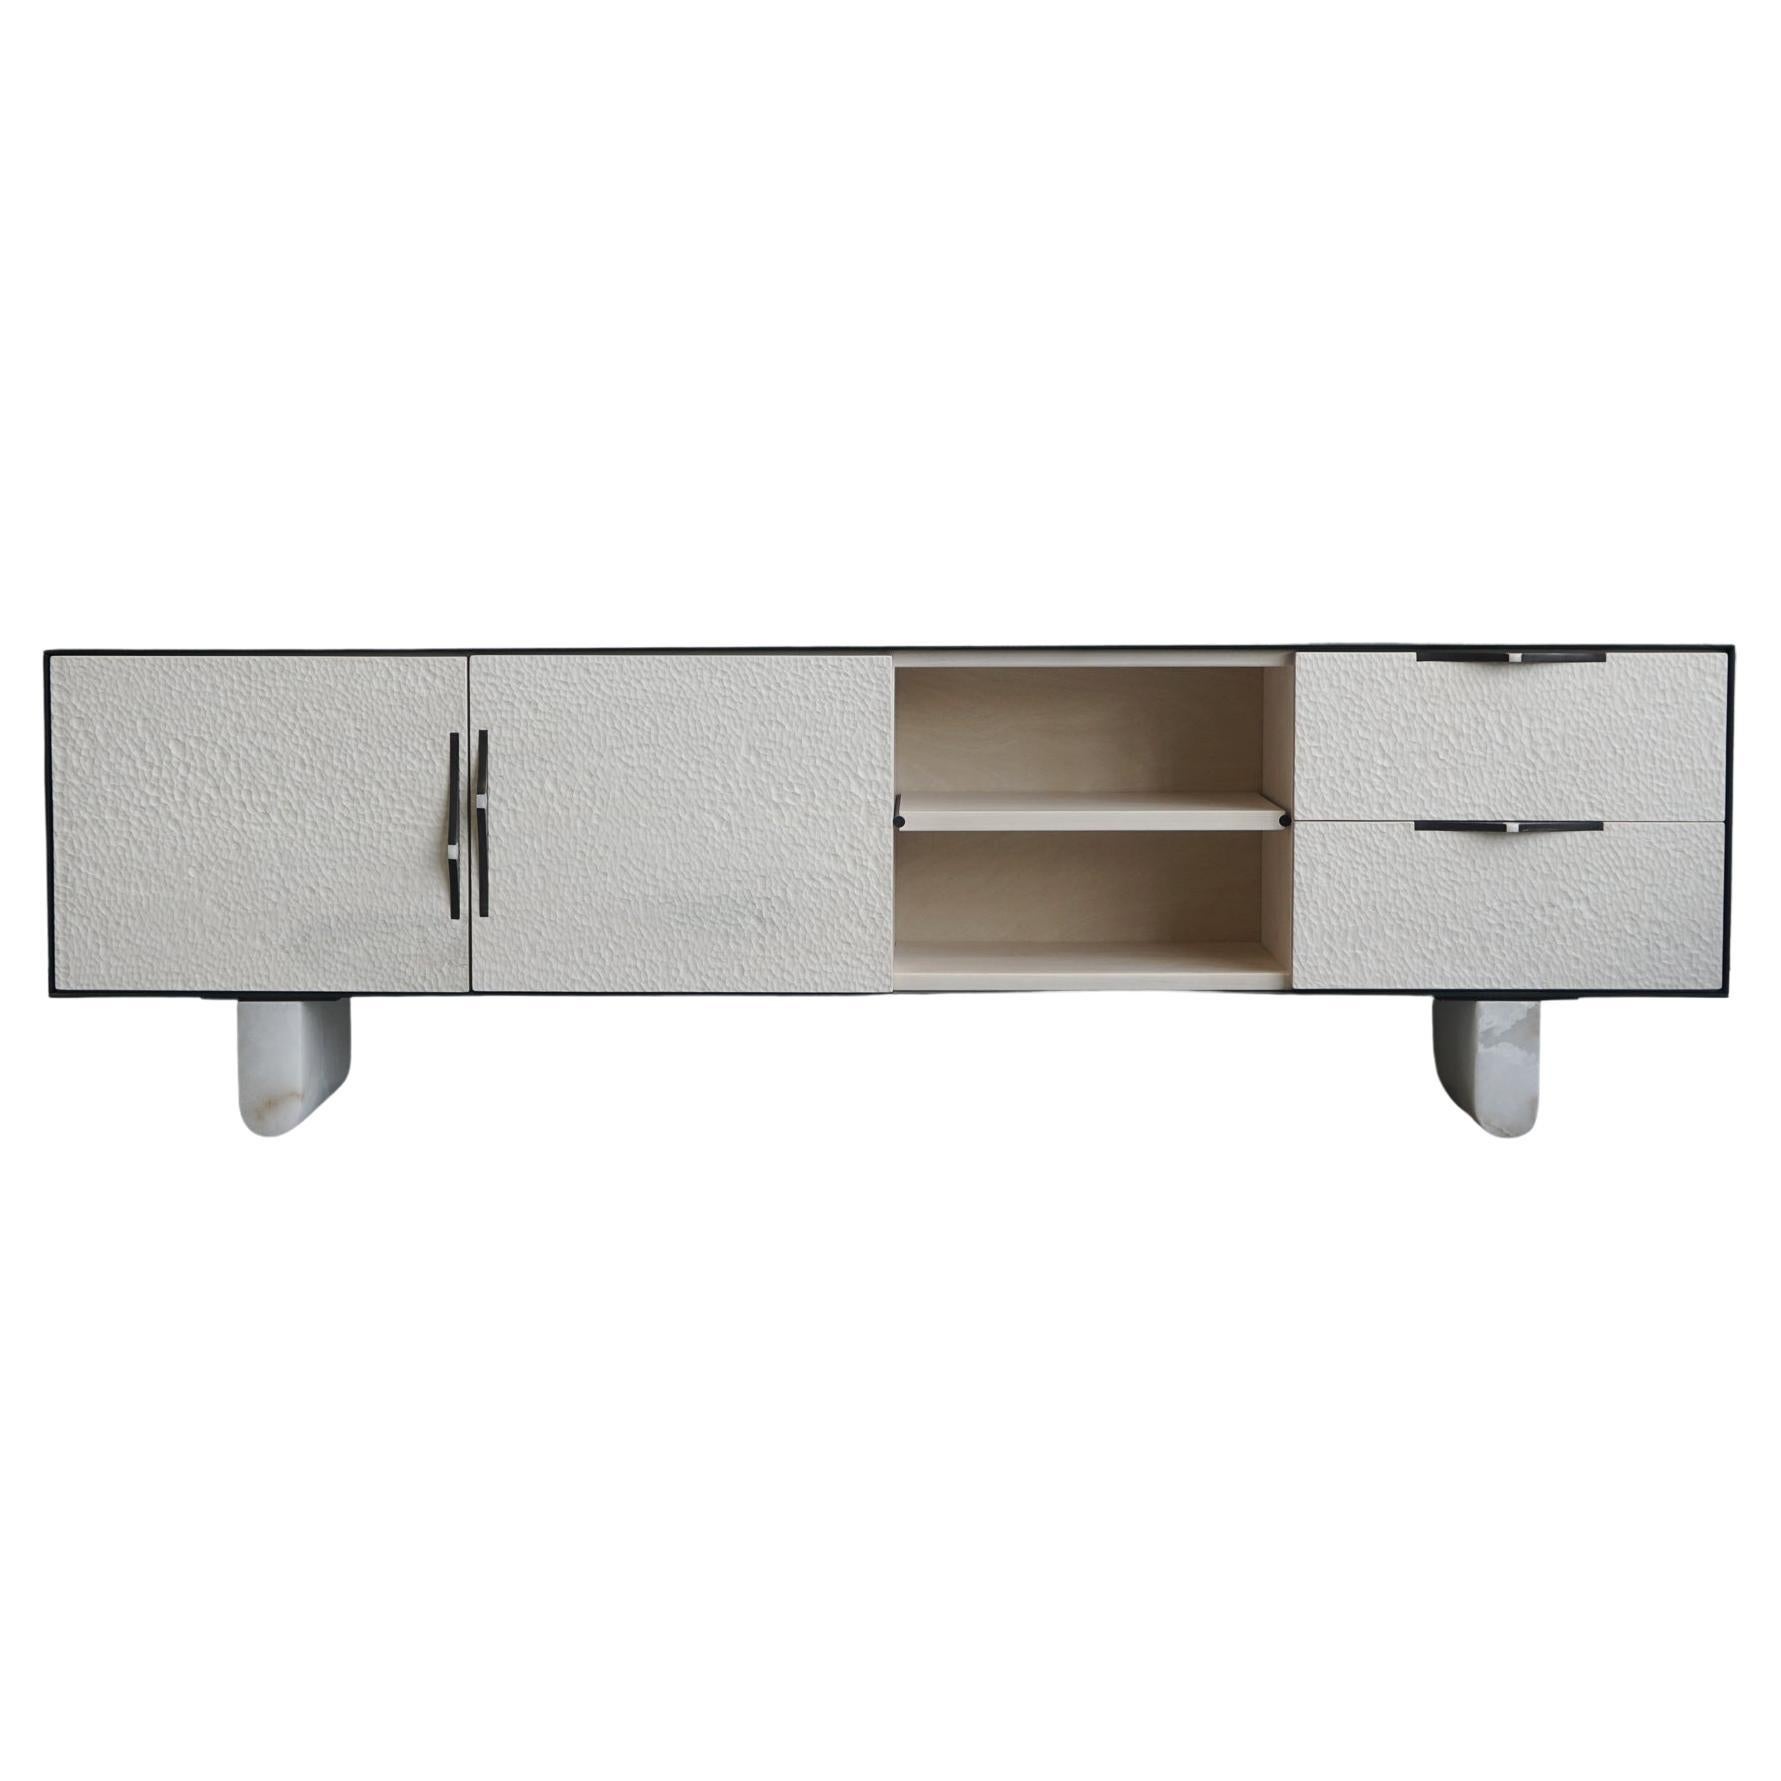 Swell Credenza 72 by Swell Studio For Sale